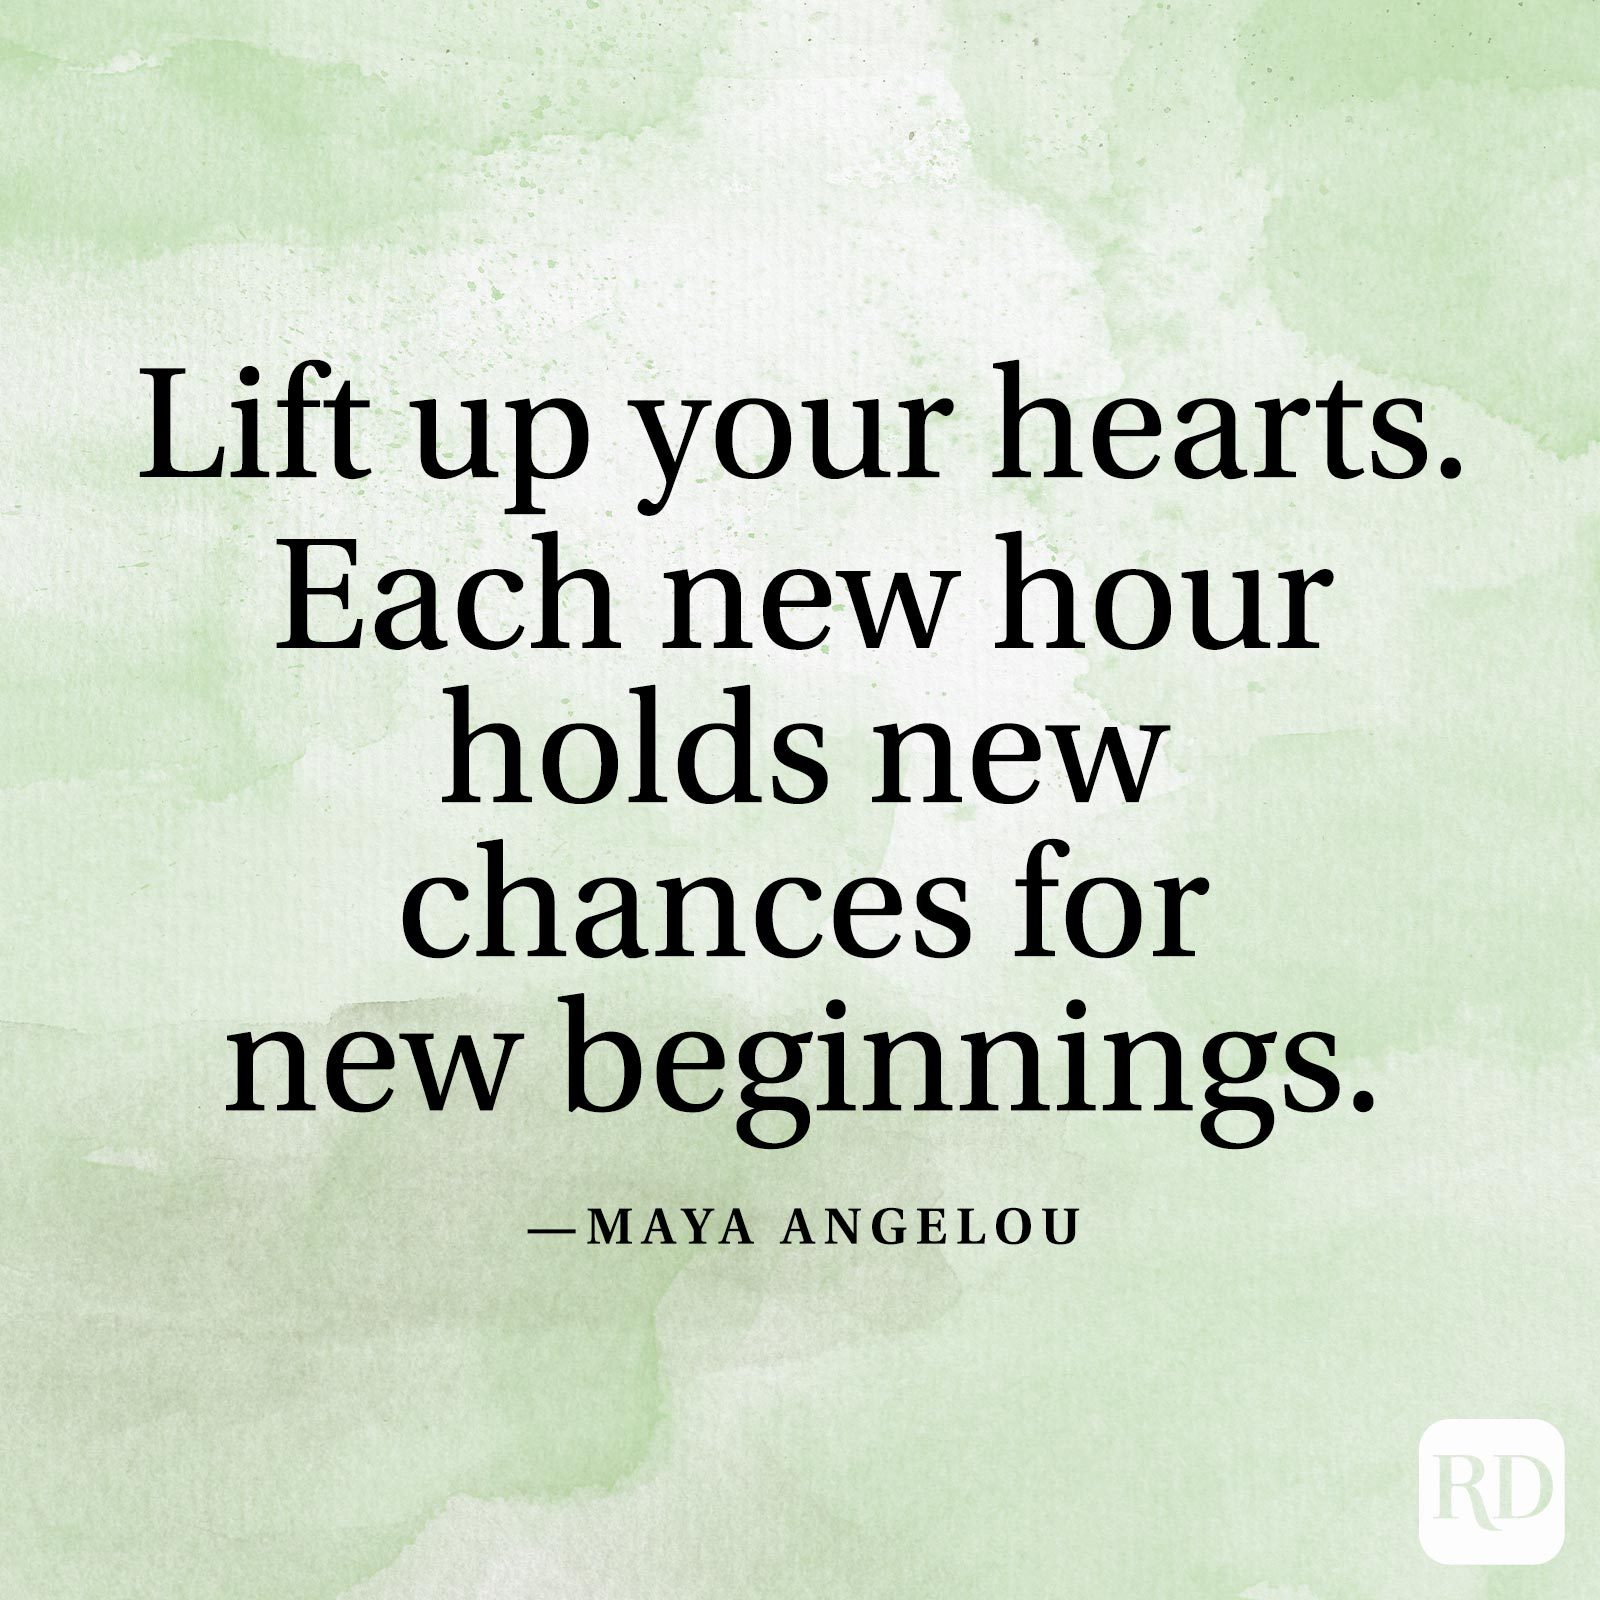 "Lift up your hearts. Each new hour holds new chances for new beginnings." —Maya Angelou